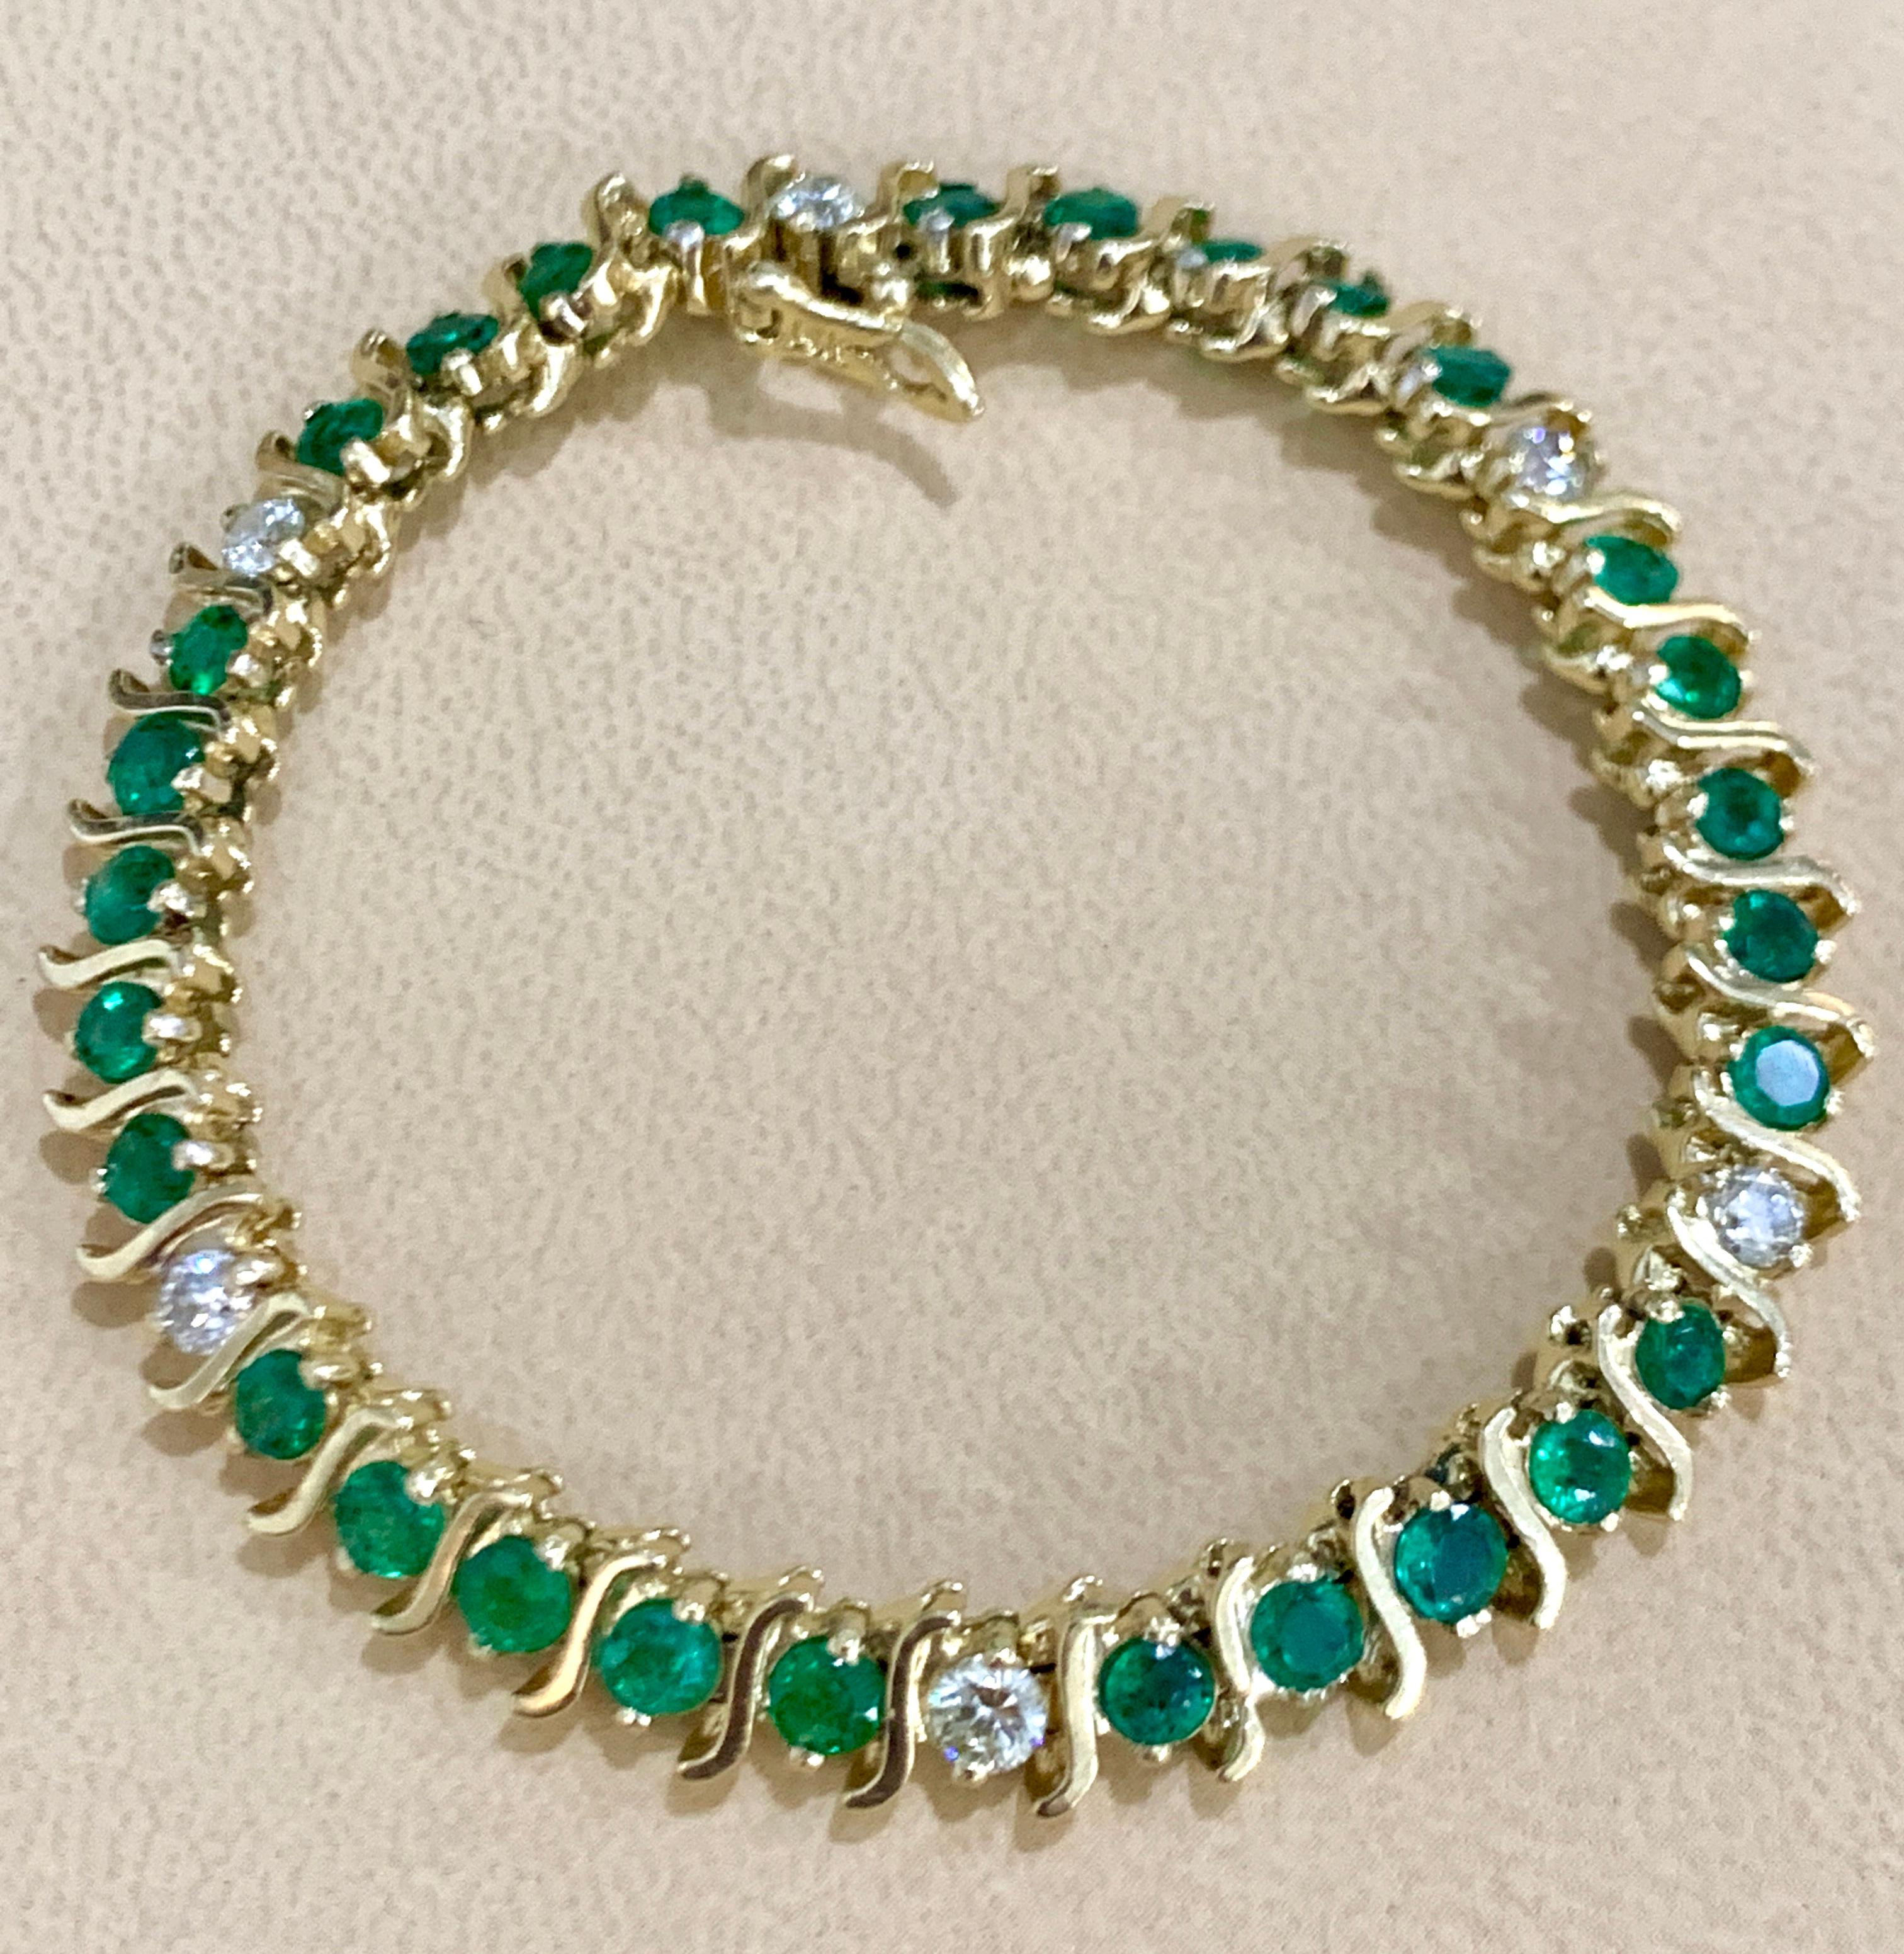 6 Carat Emerald & 1.5 Carat Diamond Tennis Bracelet 14 Karat Yellow Gold S-Shape In Excellent Condition For Sale In New York, NY